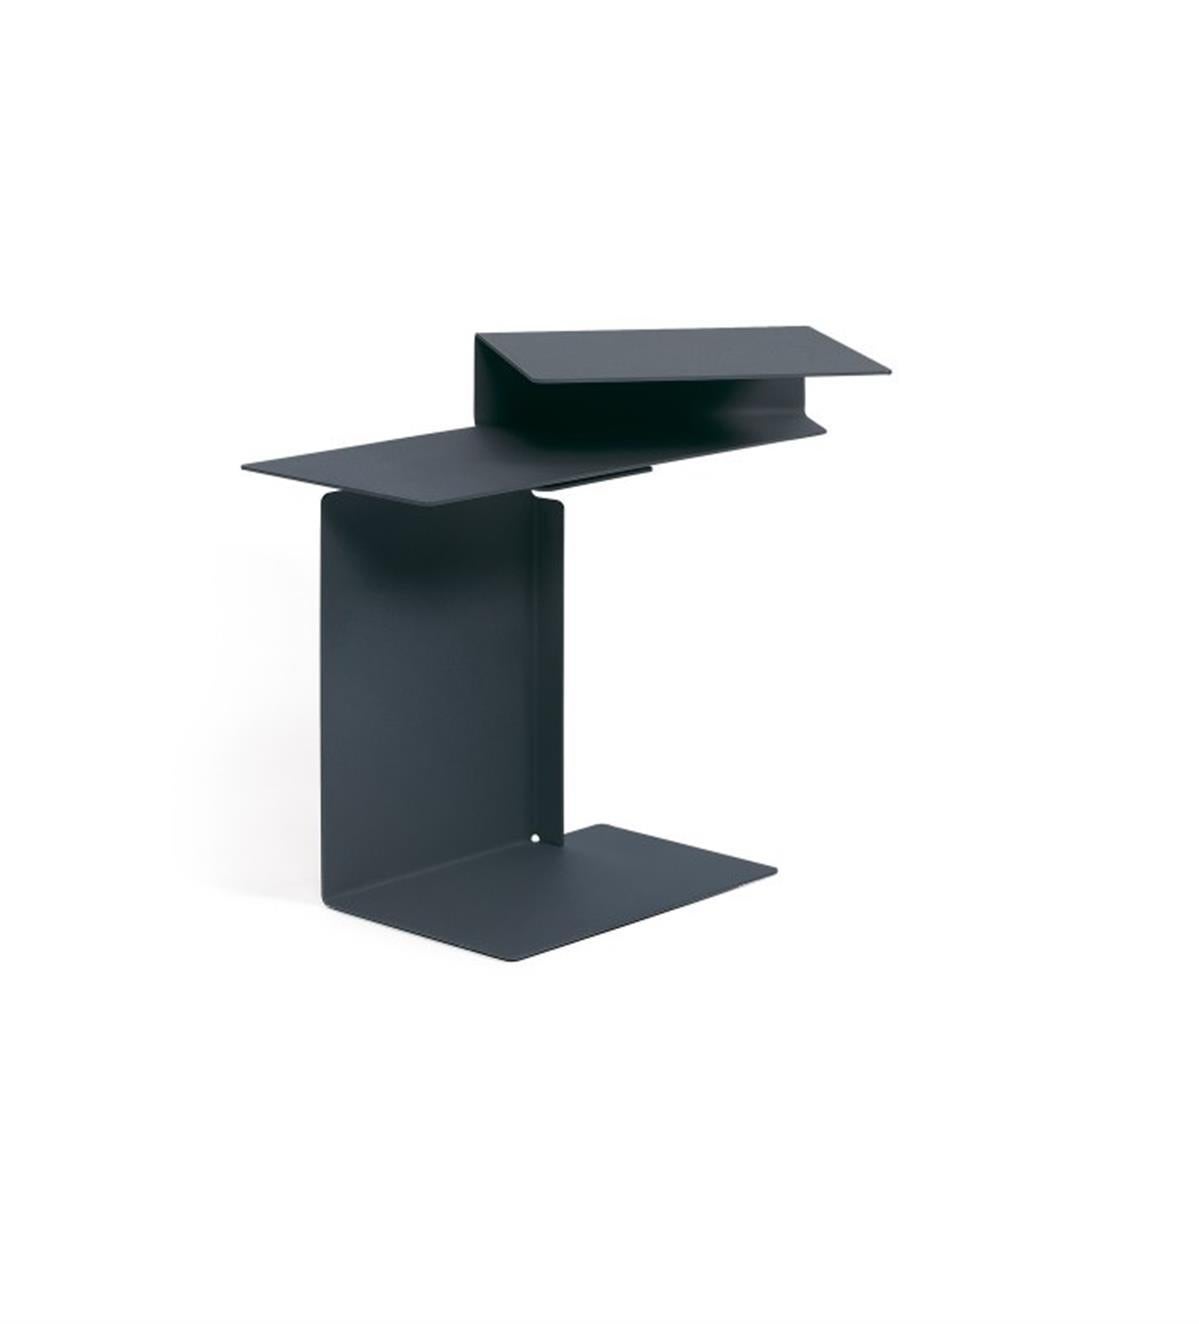 Side table? Notebook stand? Reference library? Konstantin Grcic‘s series of sheet metal tables is open to a wide range of interpretations and uses and, most importantly, to the imagination. Just as words are built from letters, the Diana tables